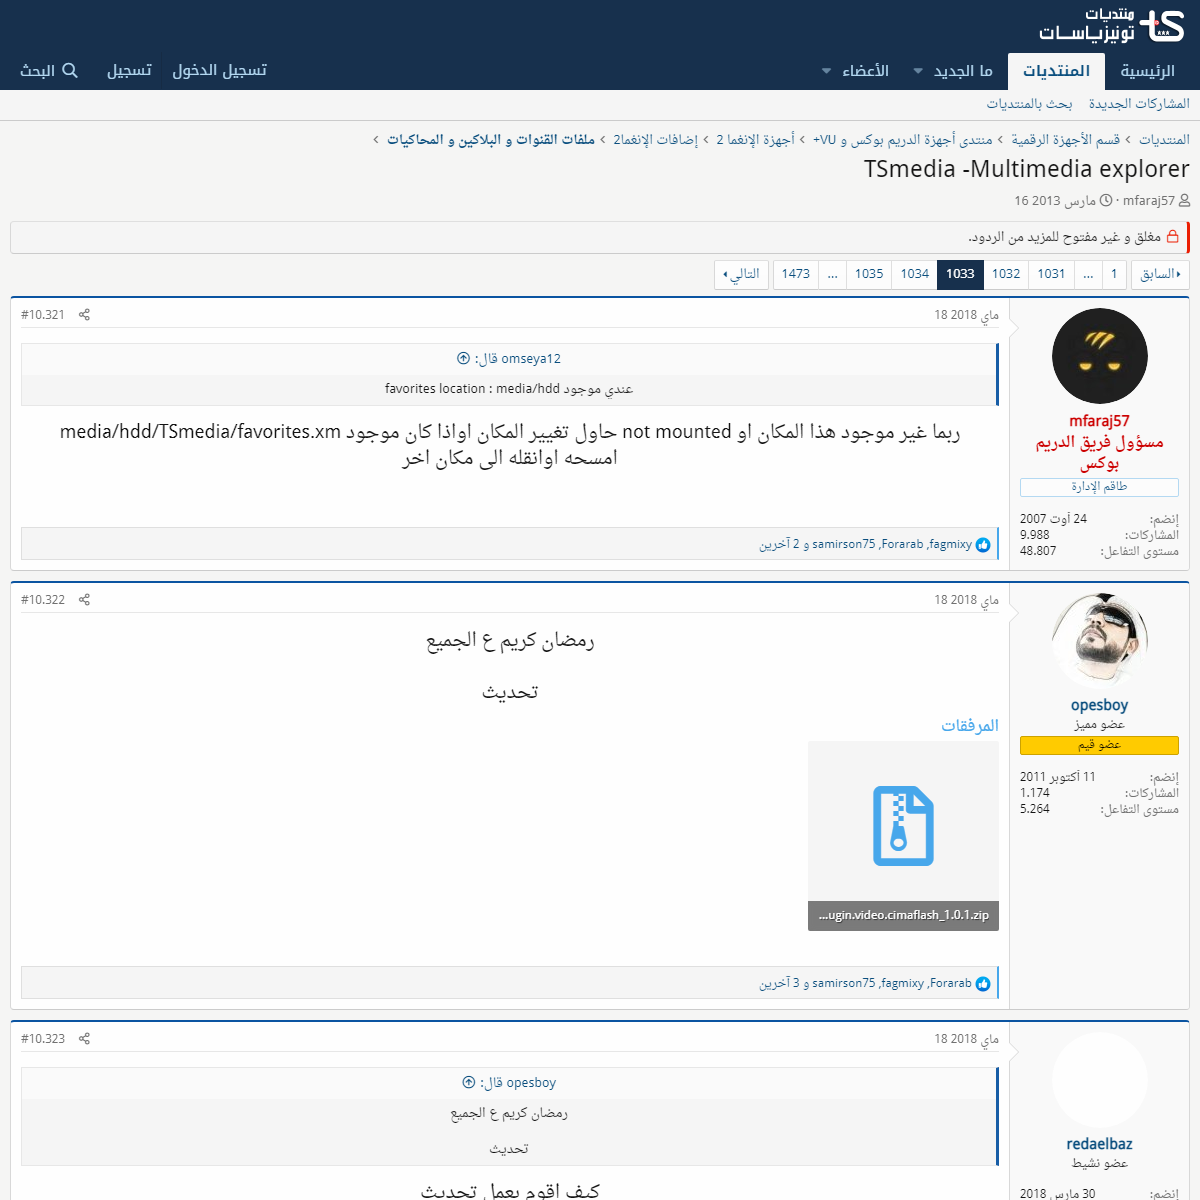 A complete backup of https://www.tunisia-sat.com/forums/threads/2606385/page-1033